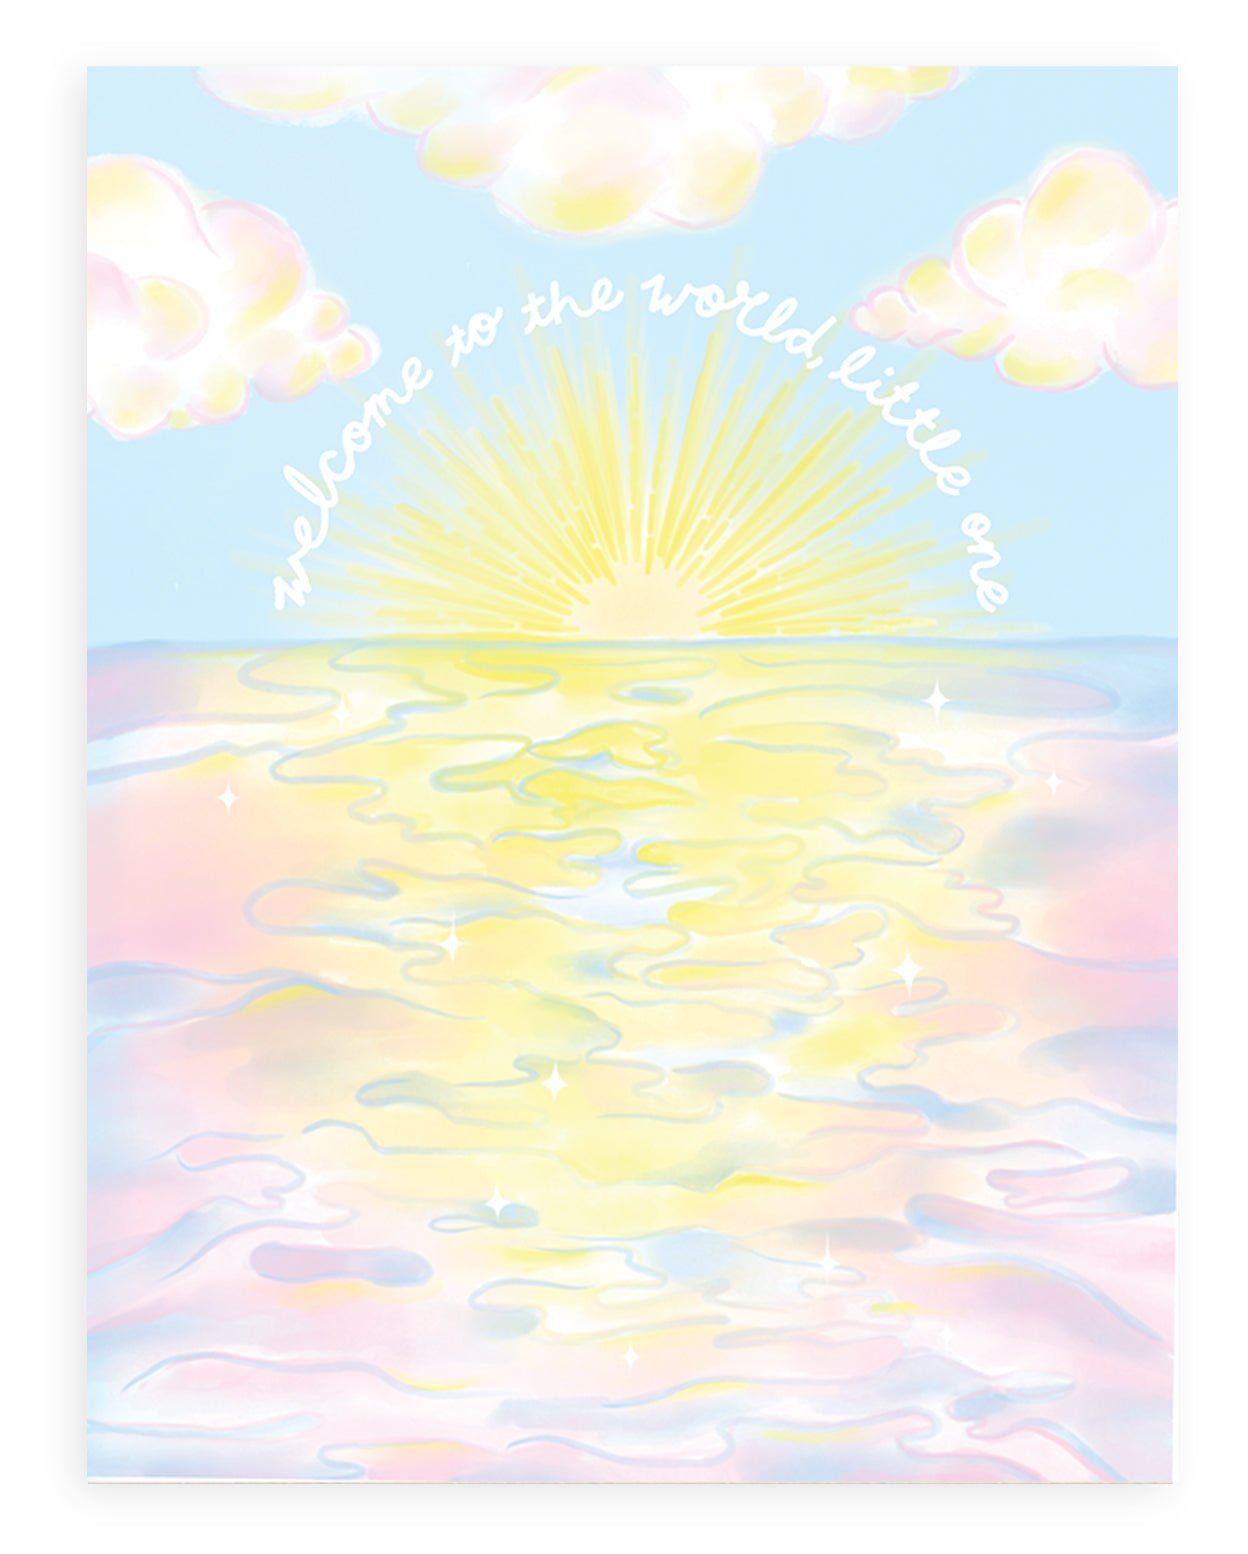 &quot;Welcome To The World Little One&quot; printed in white cursive font bending around a sunset over the ocean with a pink and blue cloudy landscape design printed on cardstock against a white background.